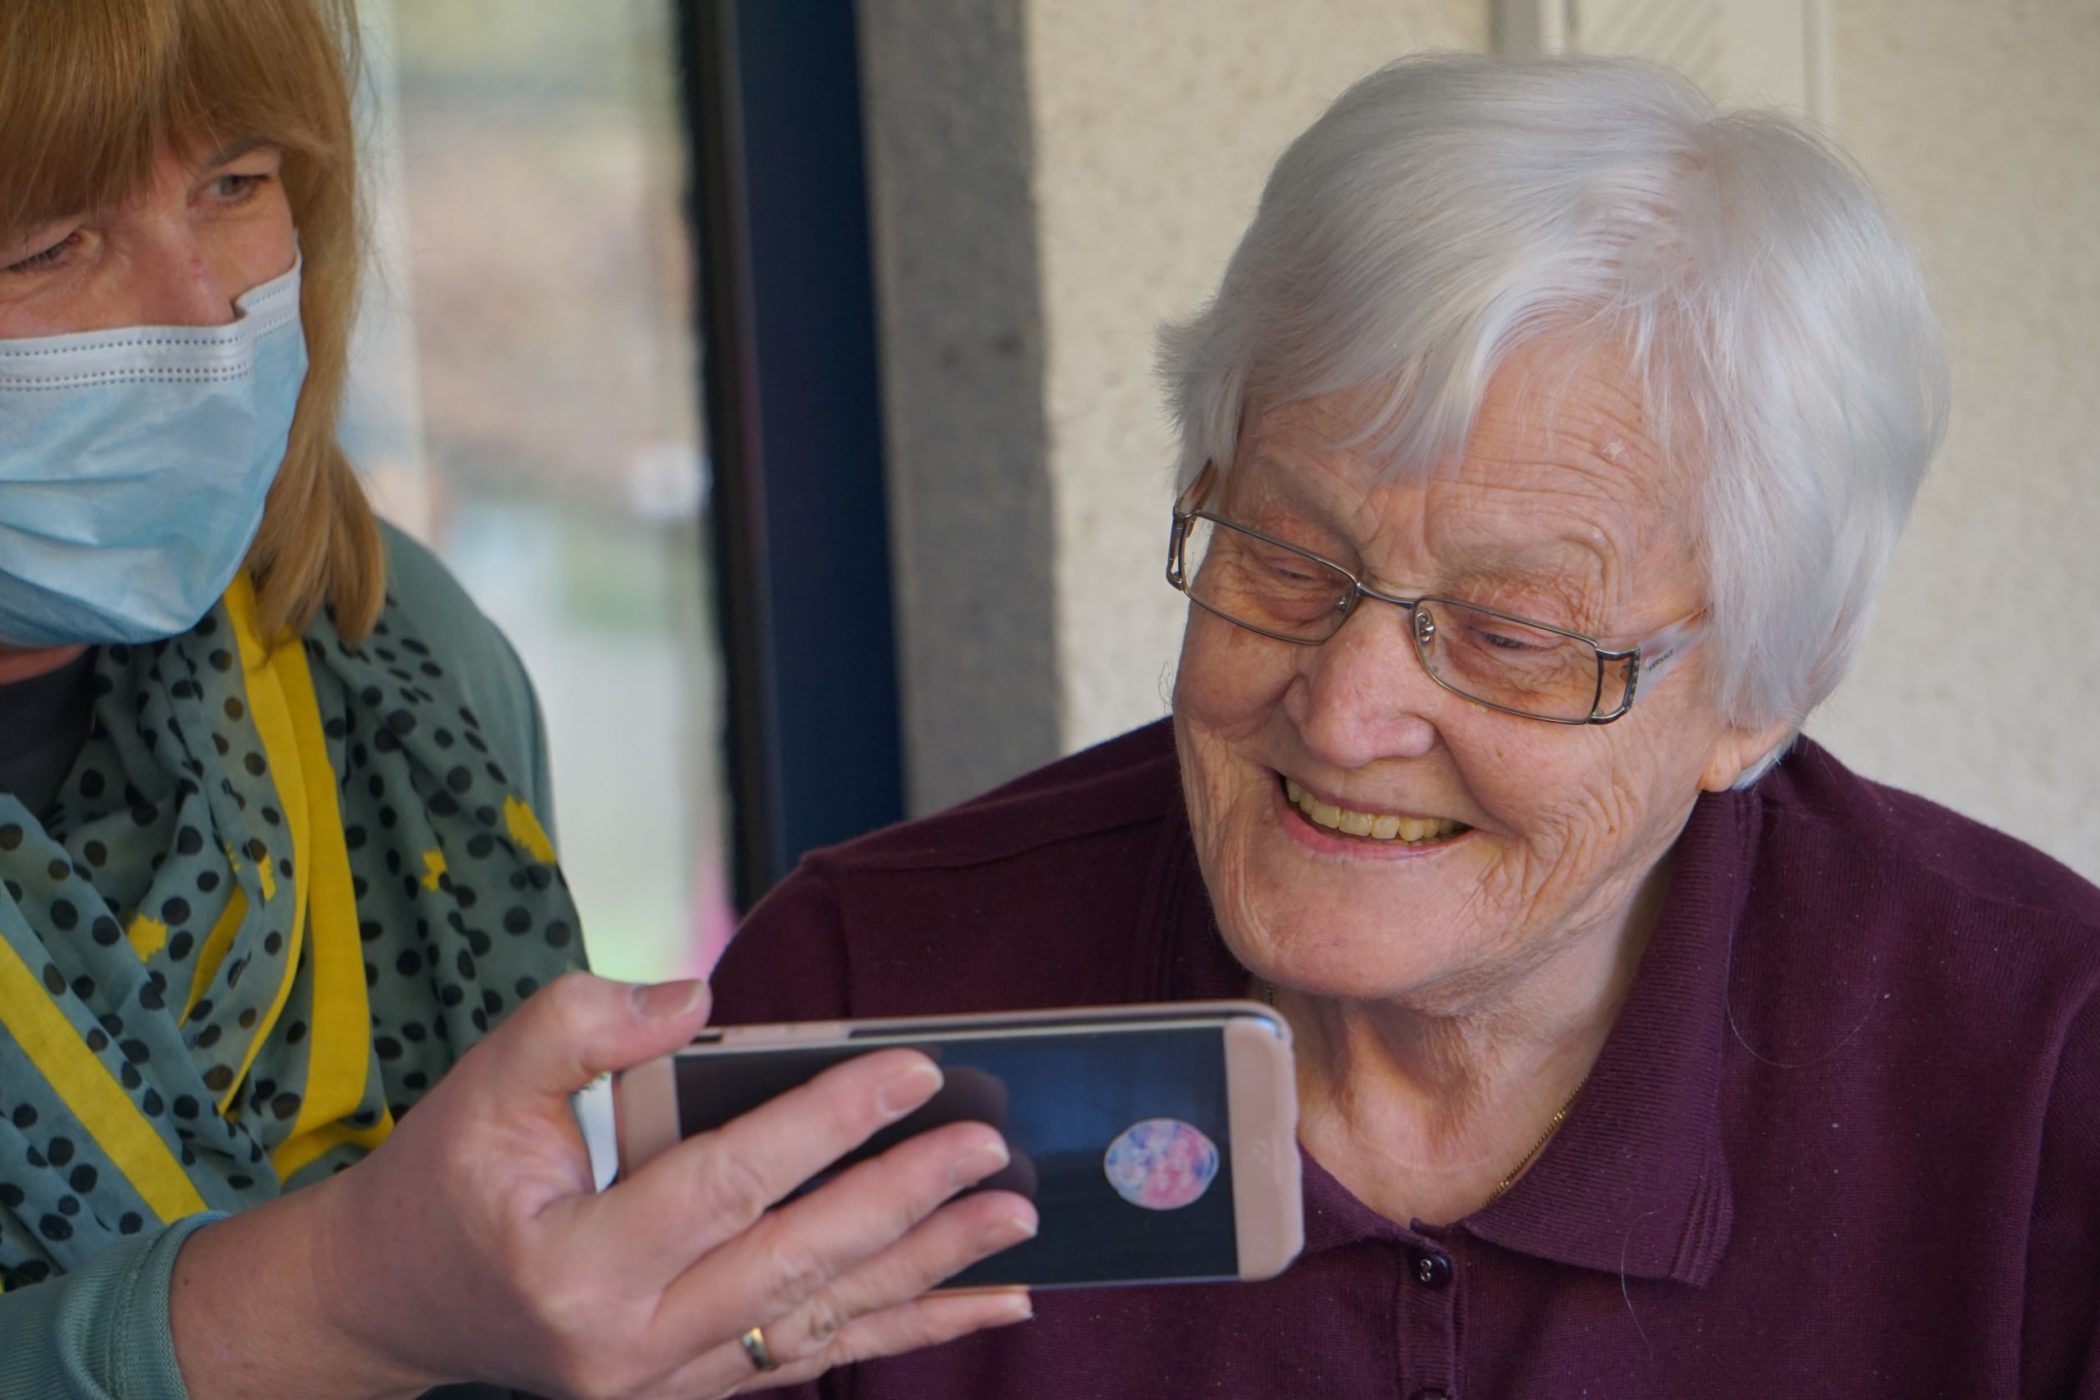 A carer helping an older lady to use an iPhone